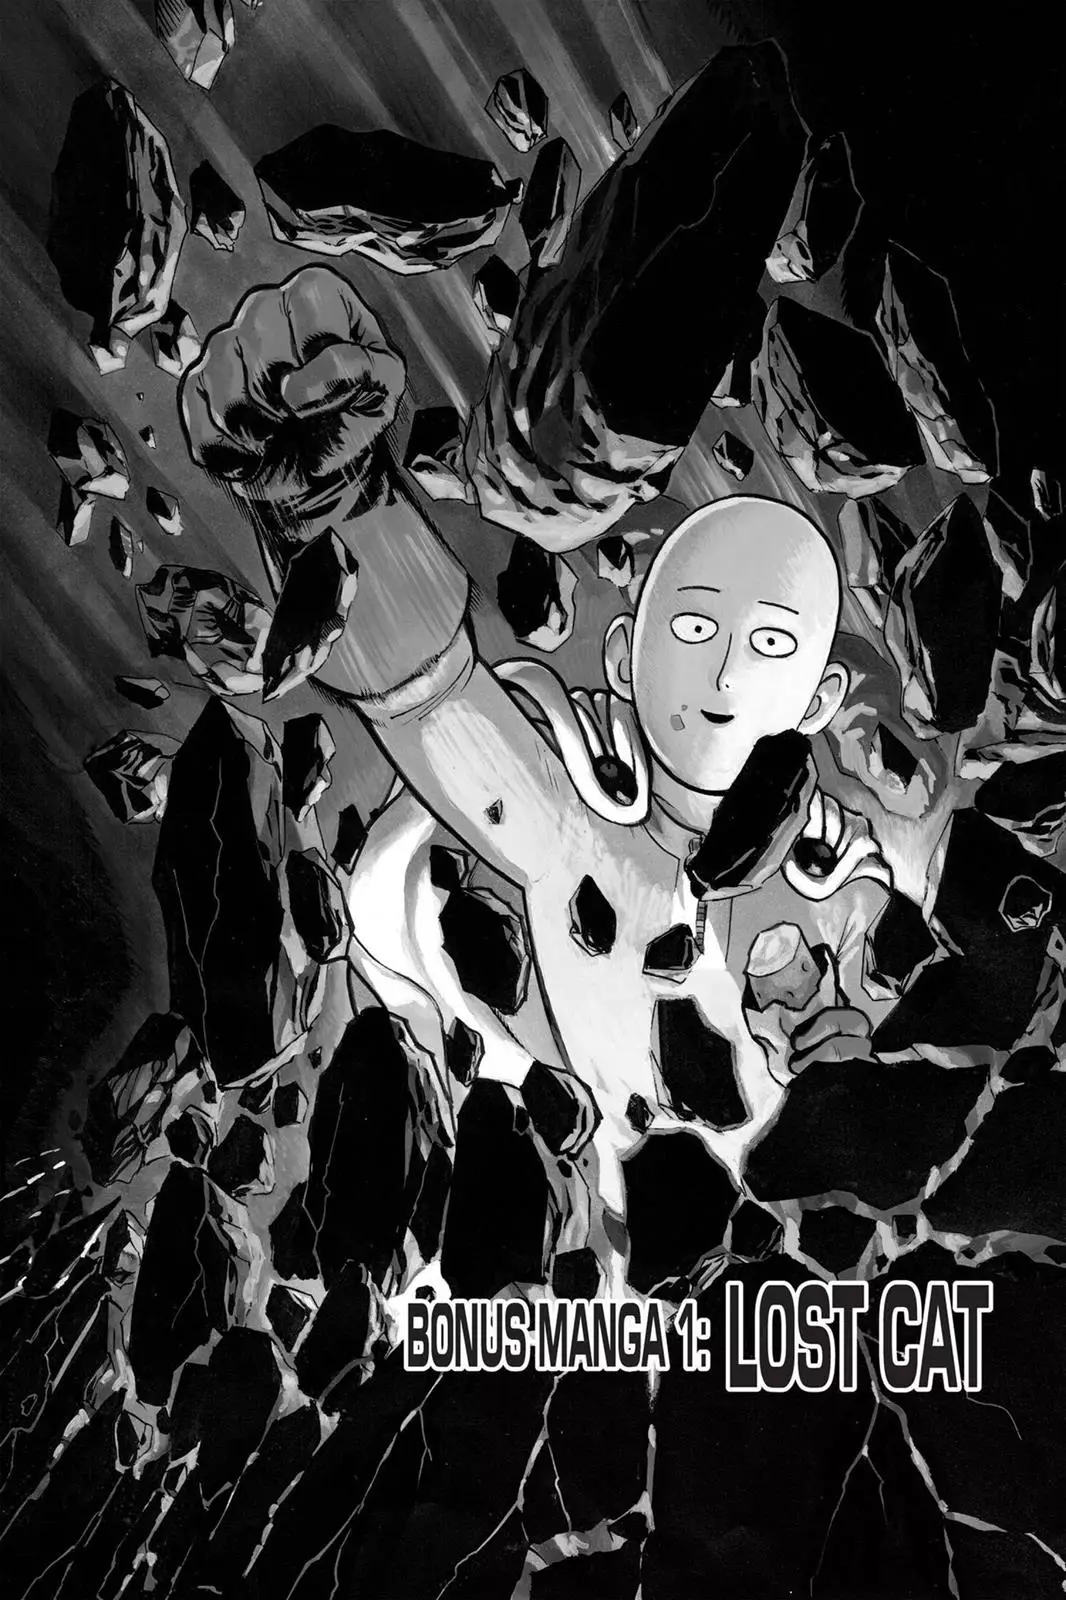 One Punch Man Chapter 40.5, READ One Punch Man Chapter 40.5 ONLINE, lost in the cloud genre,lost in the cloud gif,lost in the cloud girl,lost in the cloud goods,lost in the cloud goodreads,lost in the cloud,lost ark cloud gaming,lost odyssey cloud gaming,lost in the cloud fanart,lost in the cloud fanfic,lost in the cloud fandom,lost in the cloud first kiss,lost in the cloud font,lost in the cloud ending,lost in the cloud episode 97,lost in the cloud edit,lost in the cloud explained,lost in the cloud dog,lost in the cloud discord server,lost in the cloud desktop wallpaper,lost in the cloud drawing,can't find my cloud on network,lost in the cloud characters,lost in the cloud chapter 93 release date,lost in the cloud birthday,lost in the cloud birthday art,lost in the cloud background,lost in the cloud banner,lost in the clouds meaning,what is the black cloud in lost,lost in the cloud ao3,lost in the cloud anime,lost in the cloud art,lost in the cloud author twitter,lost in the cloud author instagram,lost in the cloud artist,lost in the cloud acrylic stand,lost in the cloud artist twitter,lost in the cloud art style,lost in the cloud analysis